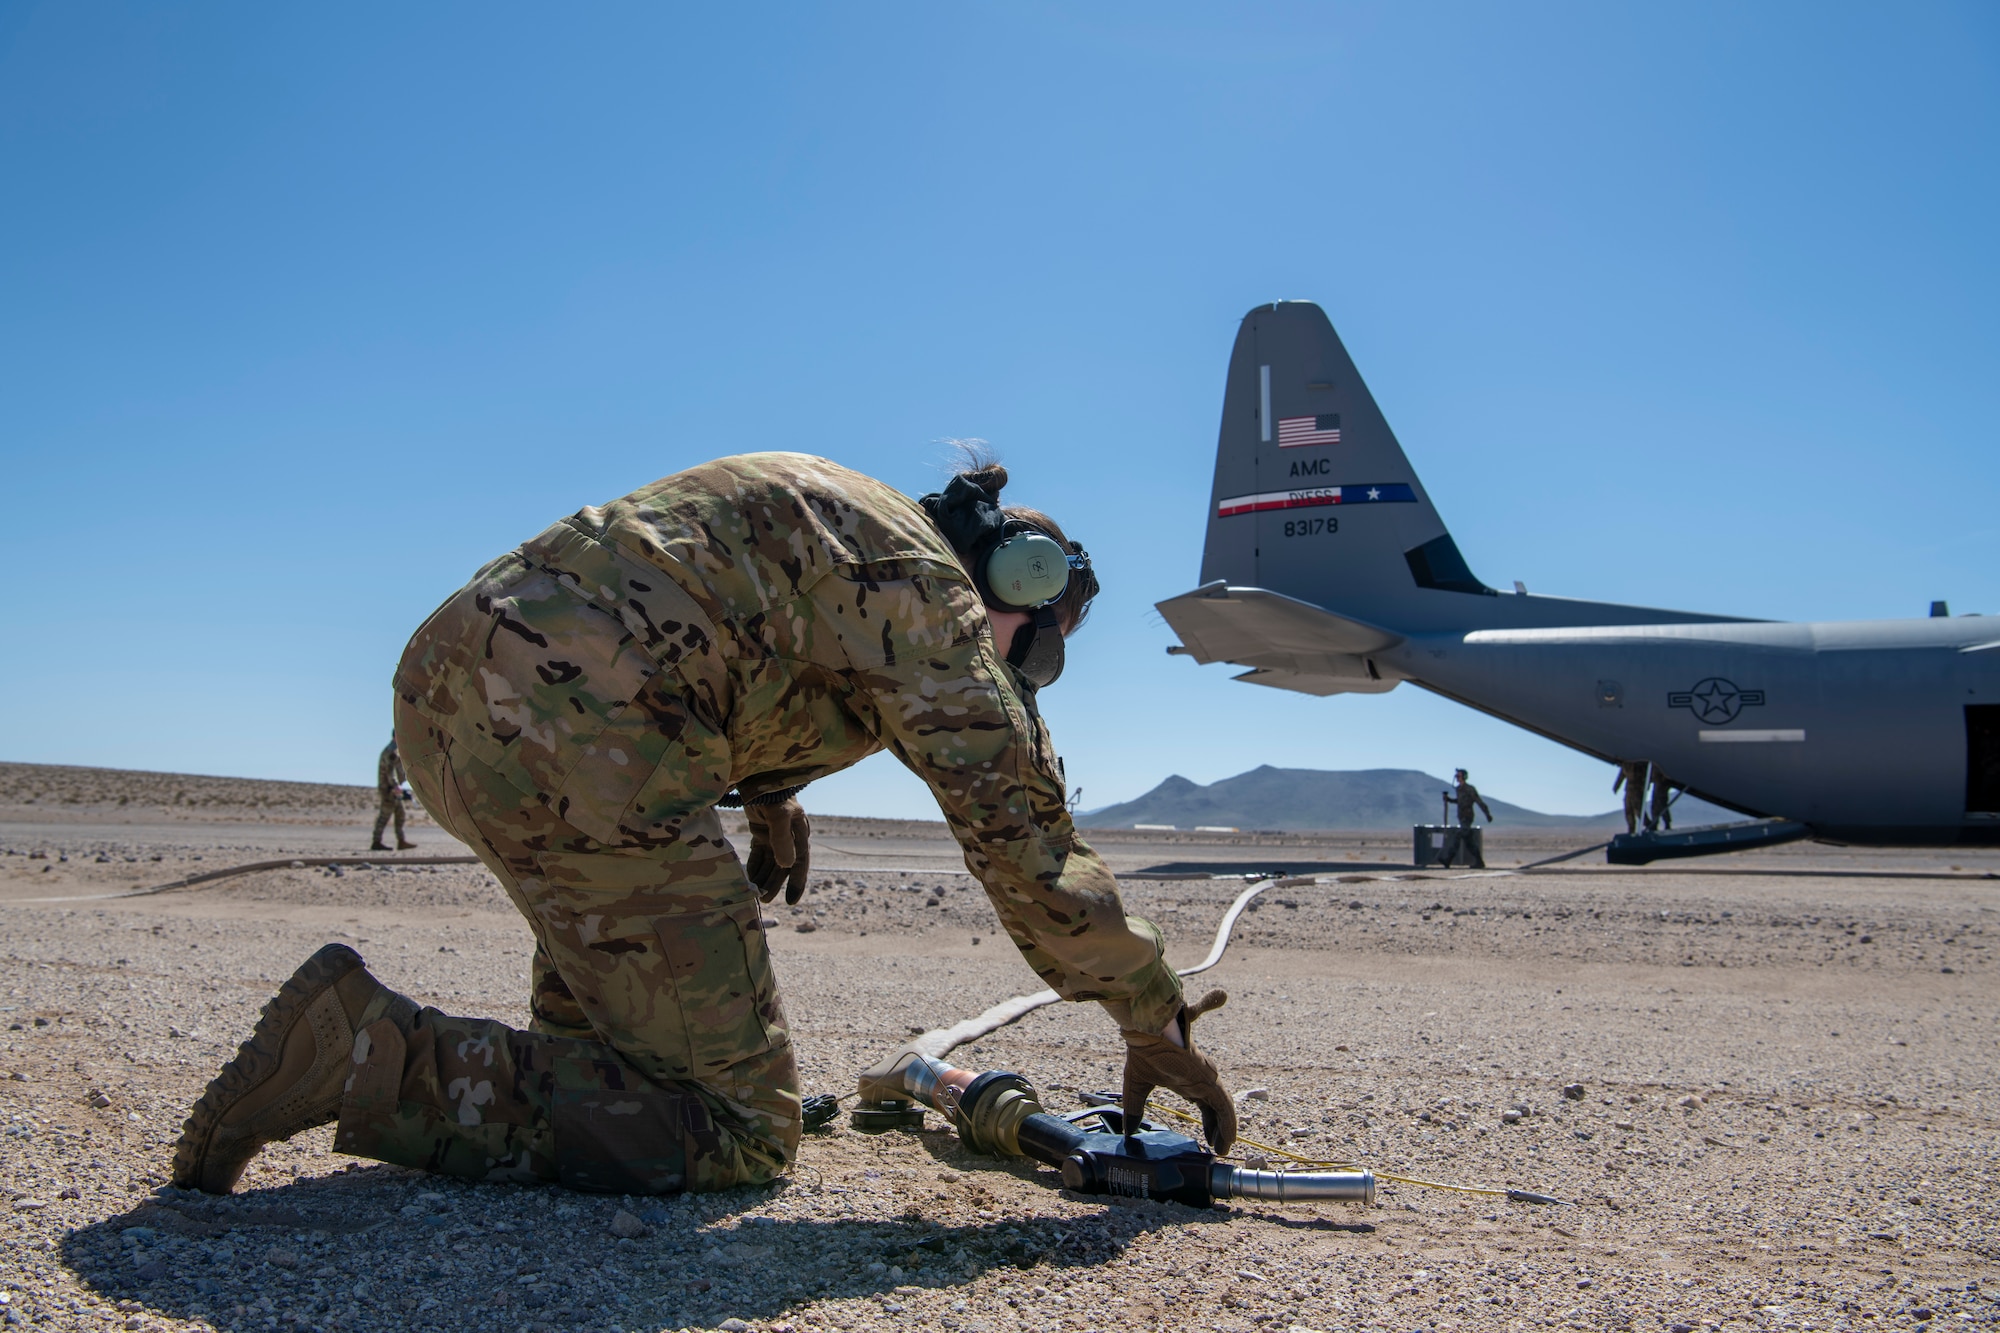 U.S. Air Force Tech. Sgt. Tristan Geray, 40th Airlift Squadron loadmaster, grabs the fuel hose of the C-130J Super Hercules during Operation Night King in the California desert March 26, 2023.